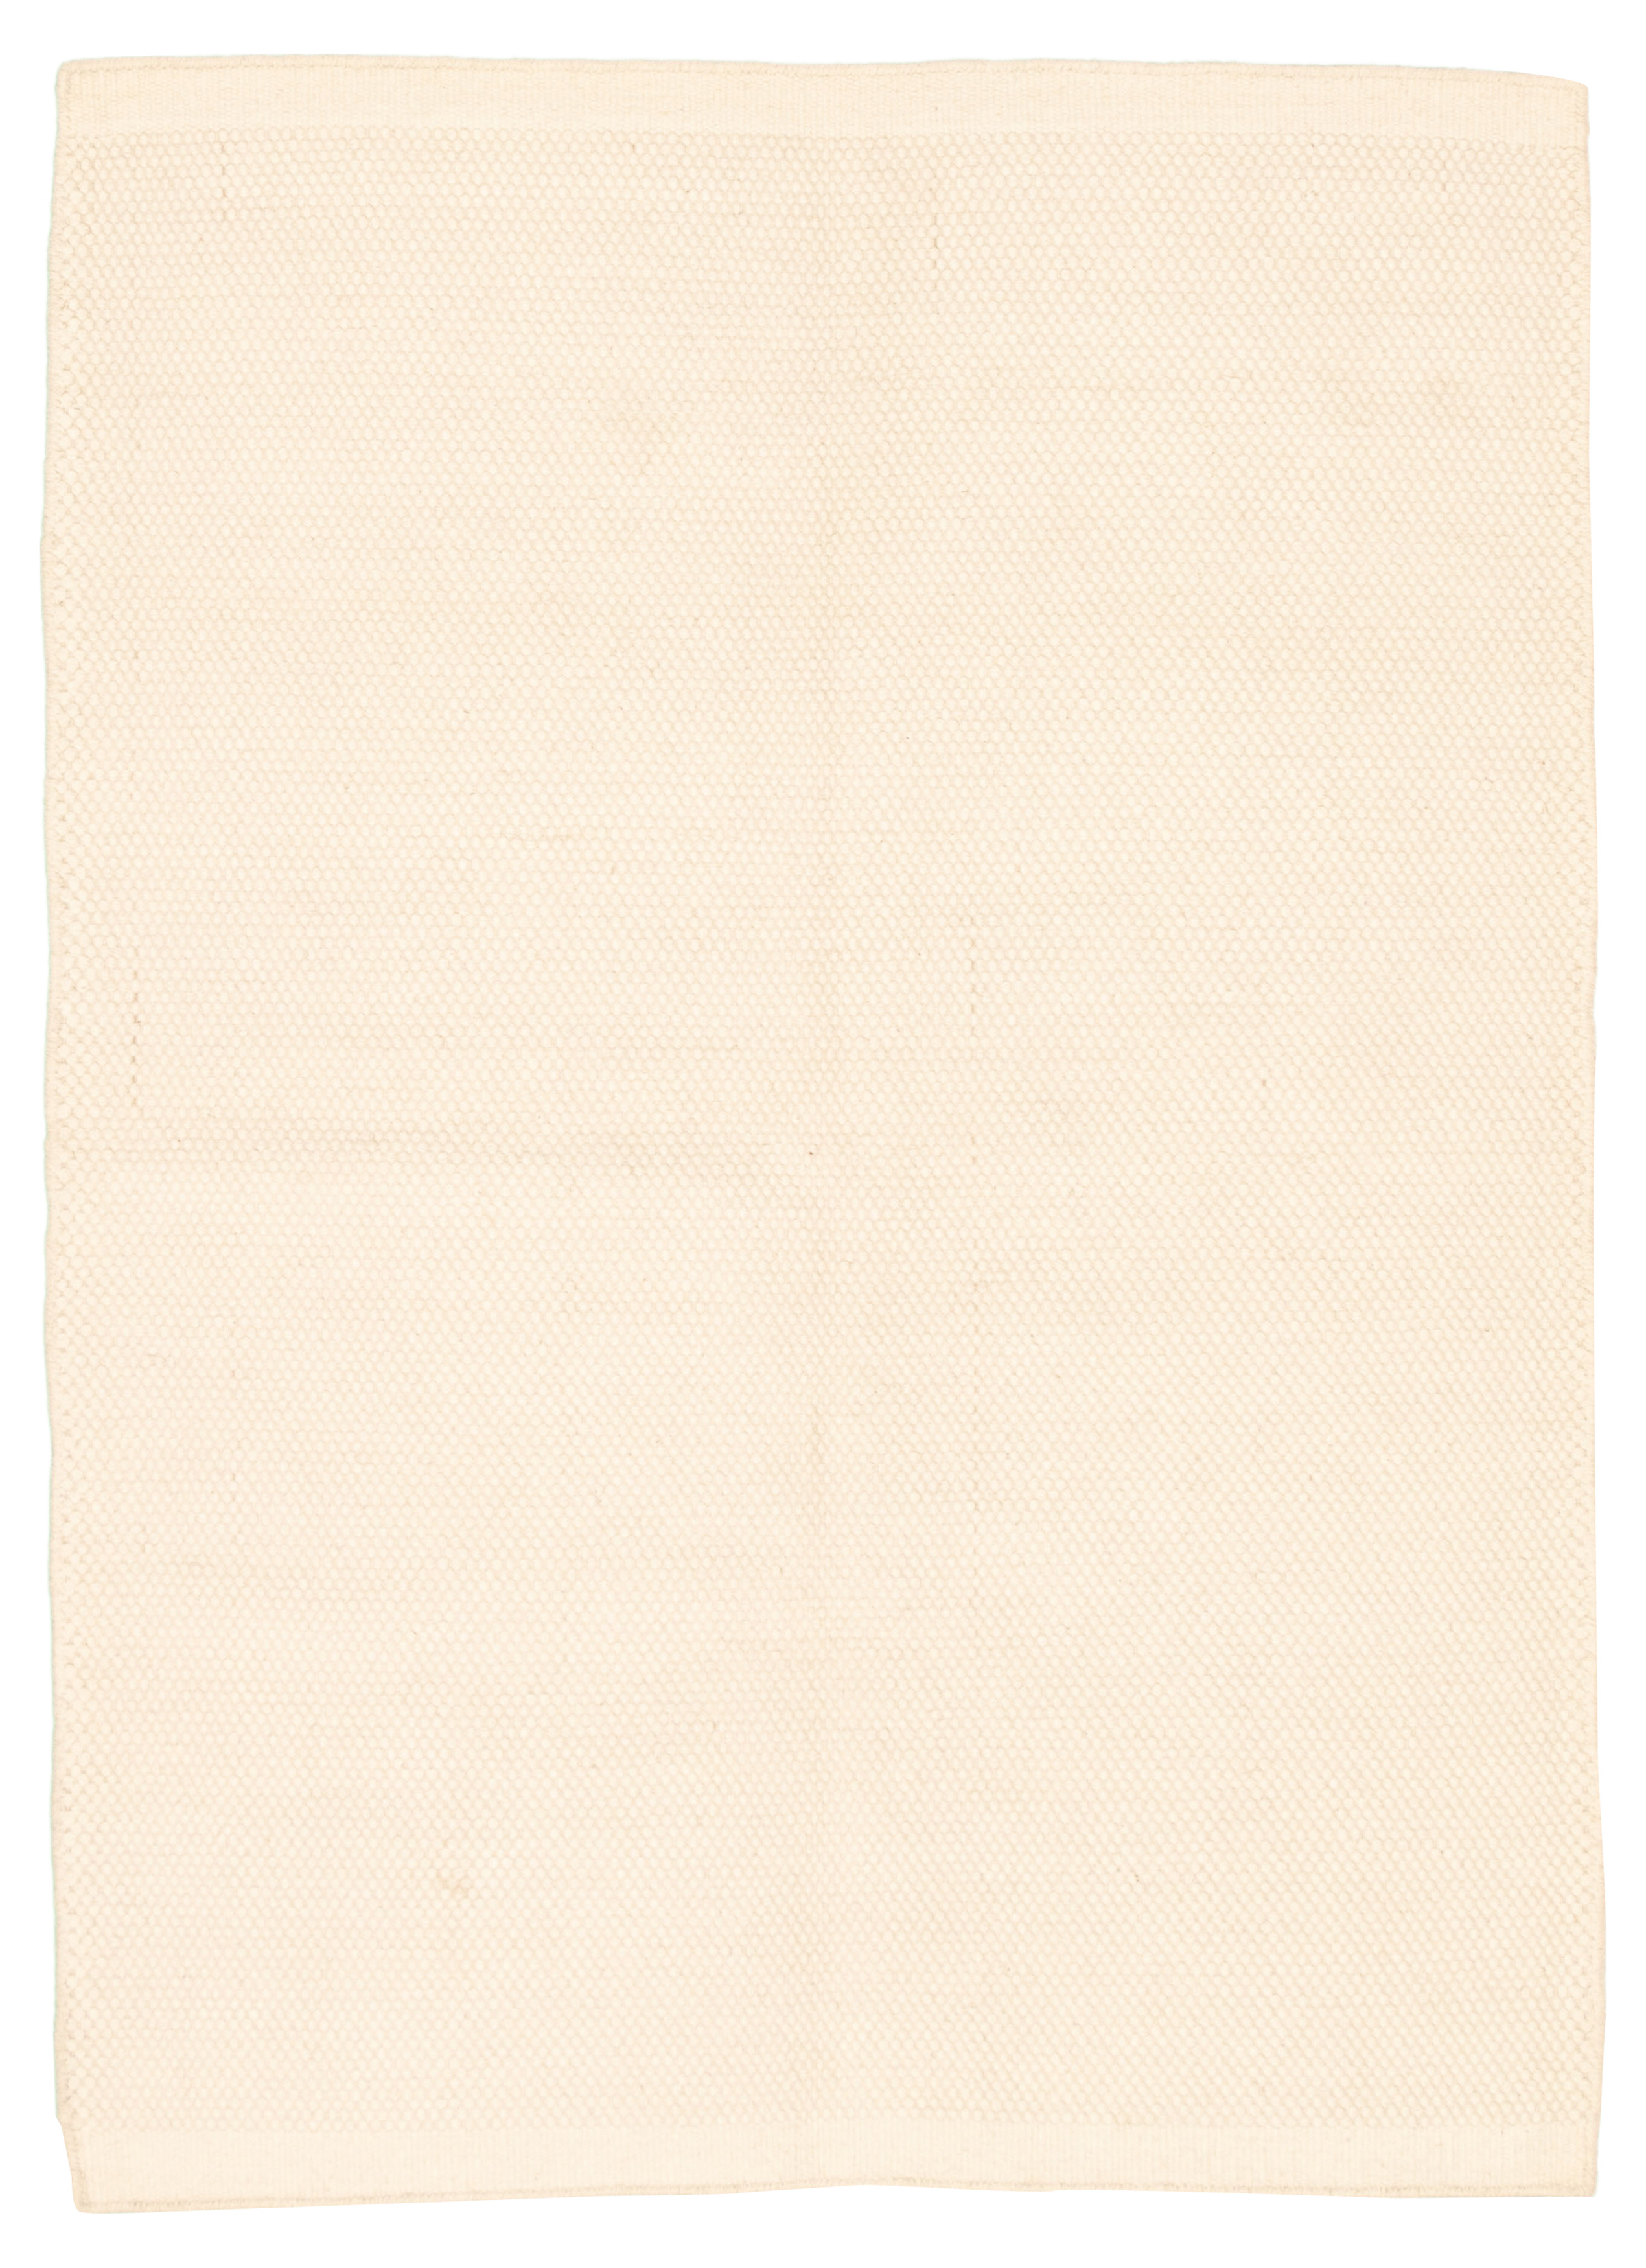 Hand loomed Bungalow CR Cream Wool Dhurrie 5'5" x 7'5" Size: 5'5" x 7'5"  